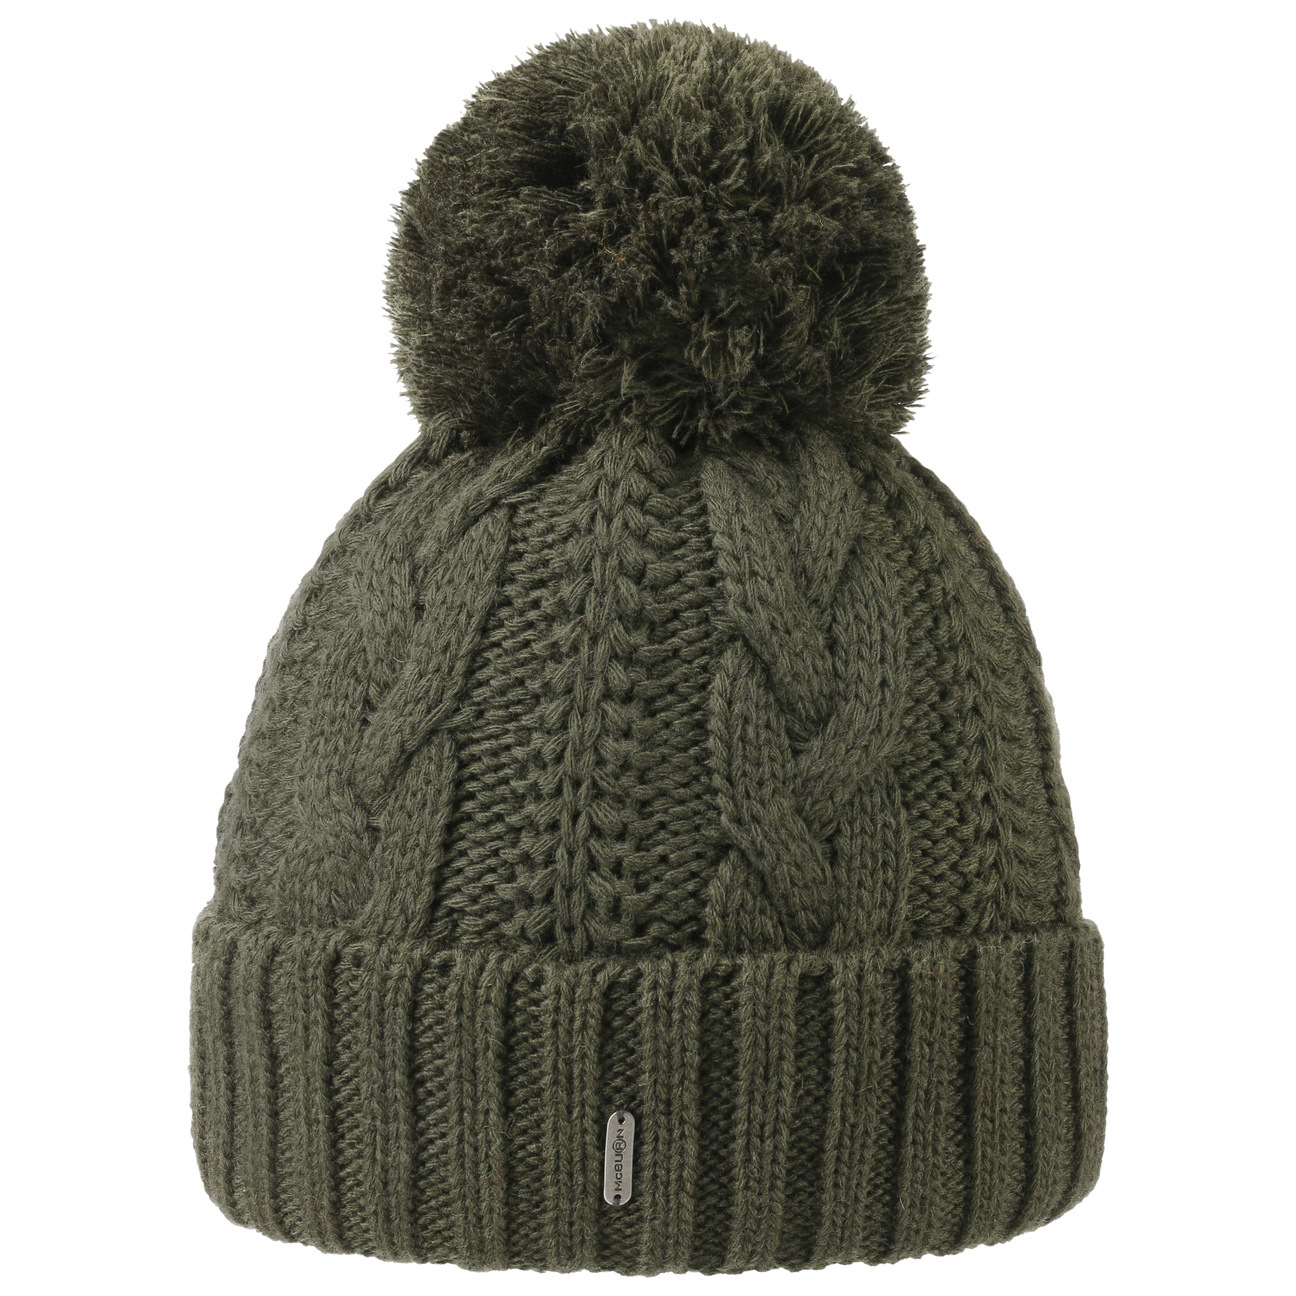 Giant Bobble Hat by McBURN - 39,95